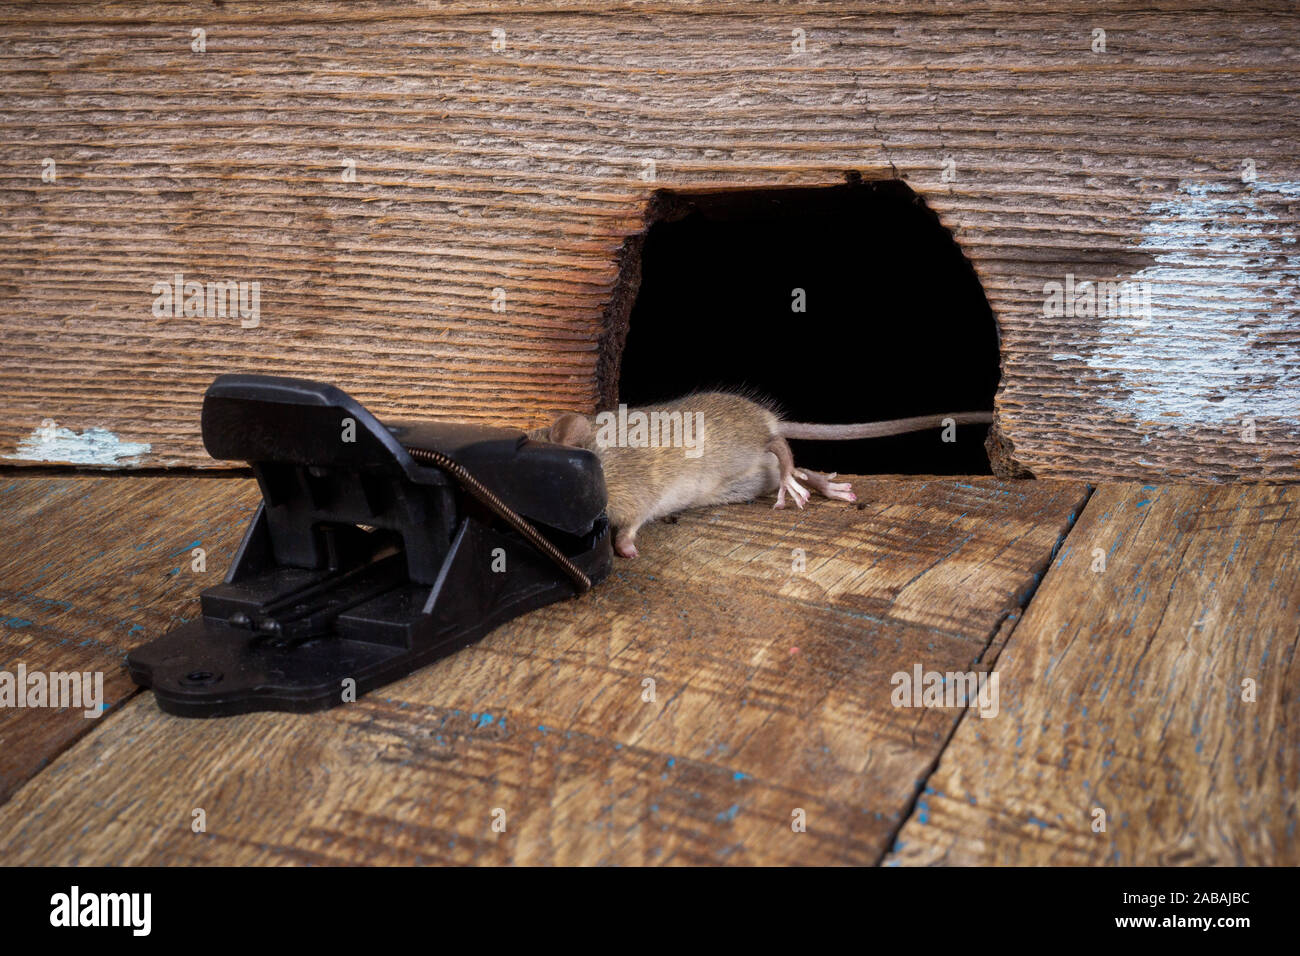 https://c8.alamy.com/comp/2ABAJBC/a-dead-mouse-in-a-mousetrap-near-a-hole-in-a-wooden-wall-2ABAJBC.jpg